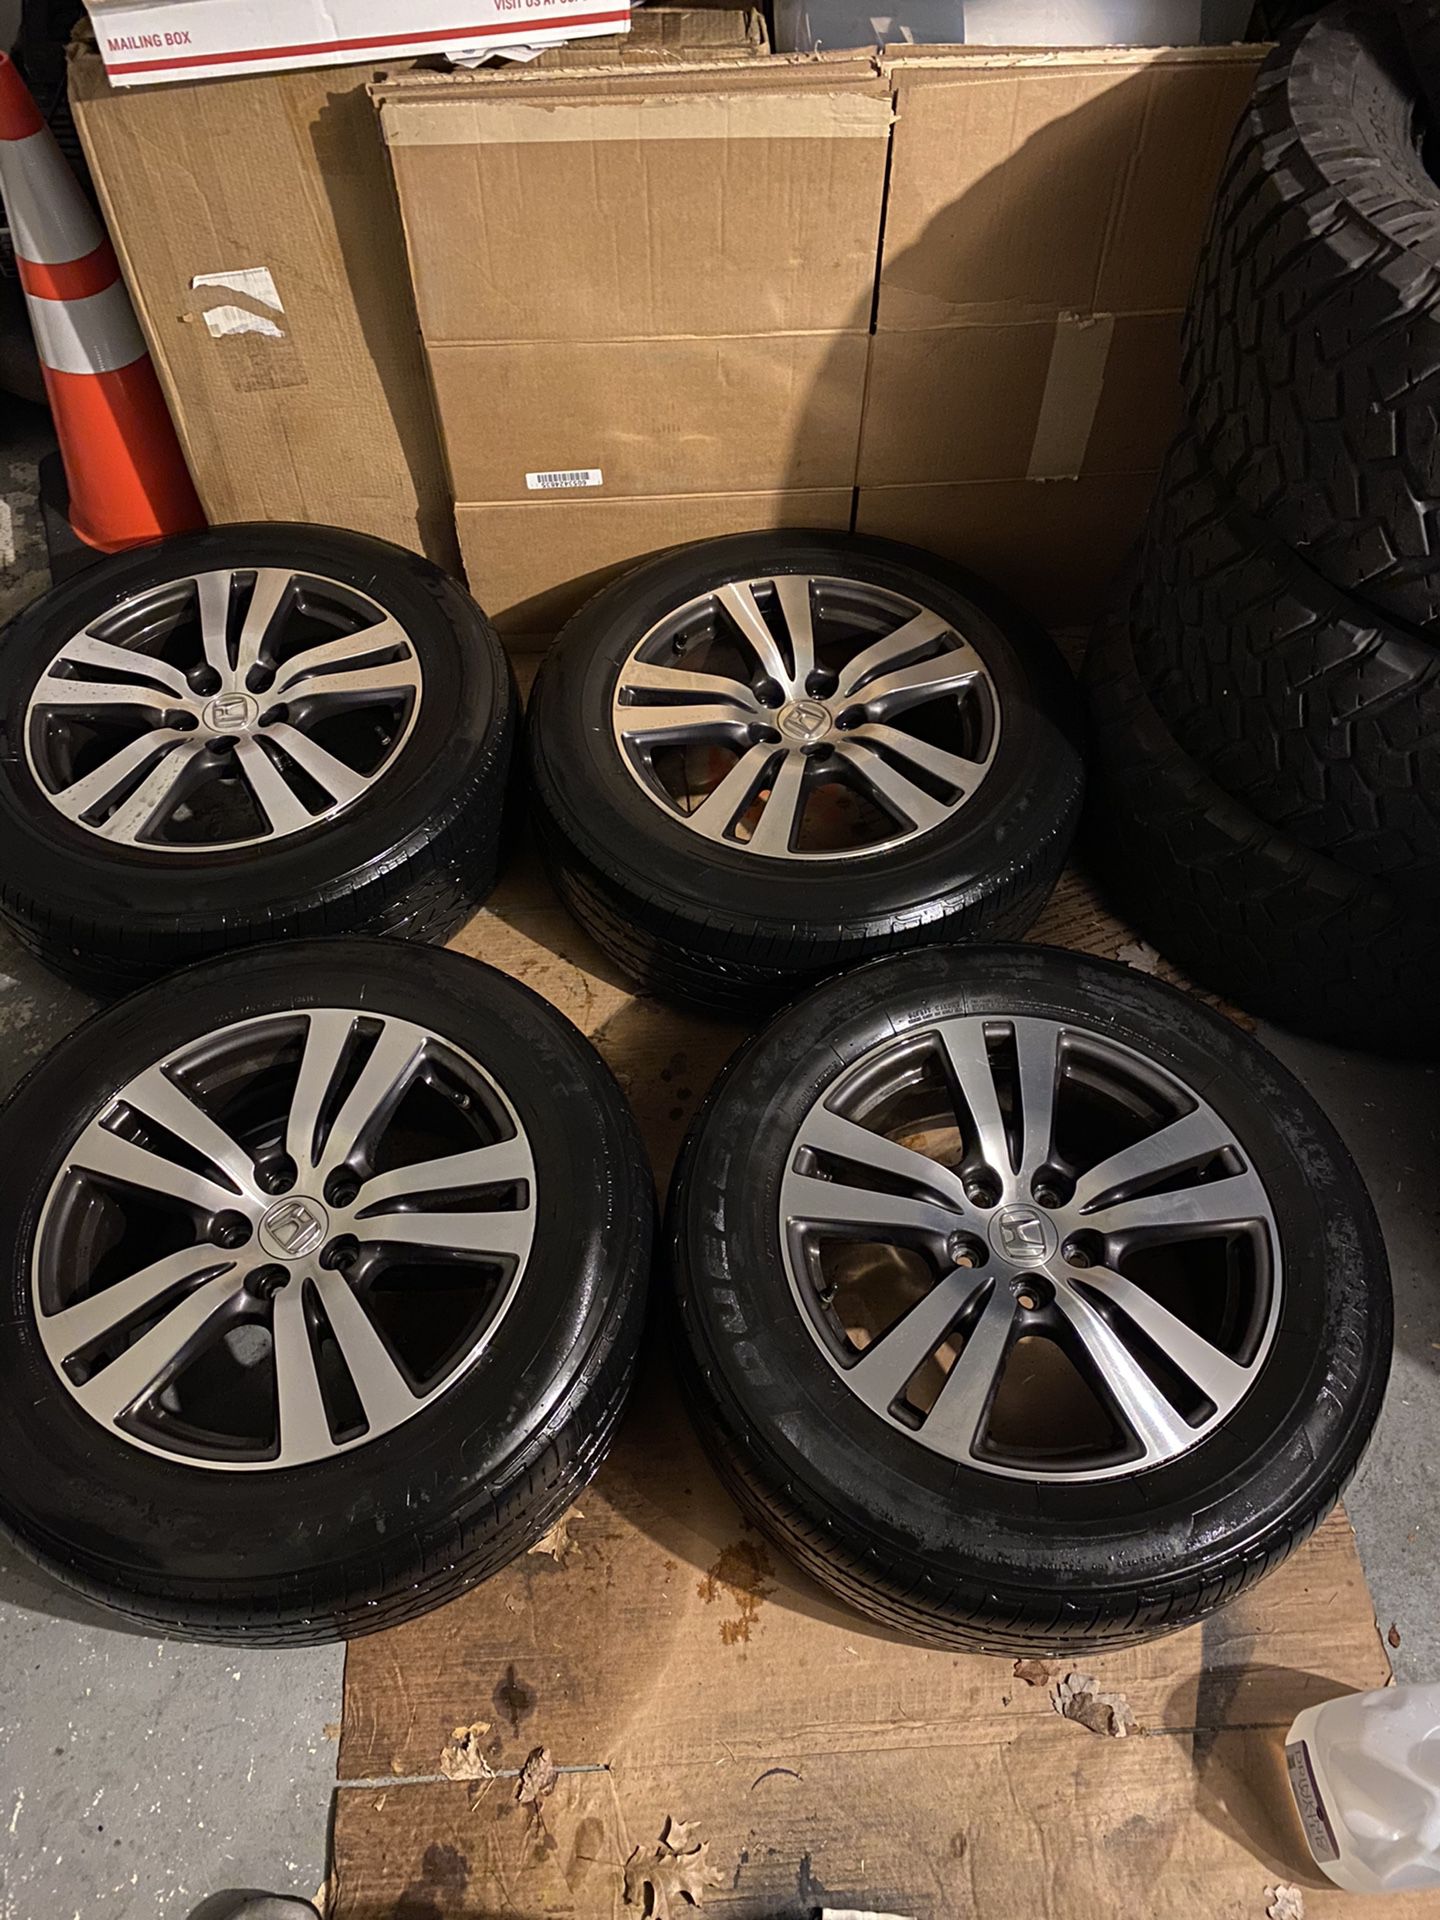 HONDA PILOT OEM WHEELS 18” WITH TIRES AND TPMS SENSORS GREAT CONDITION